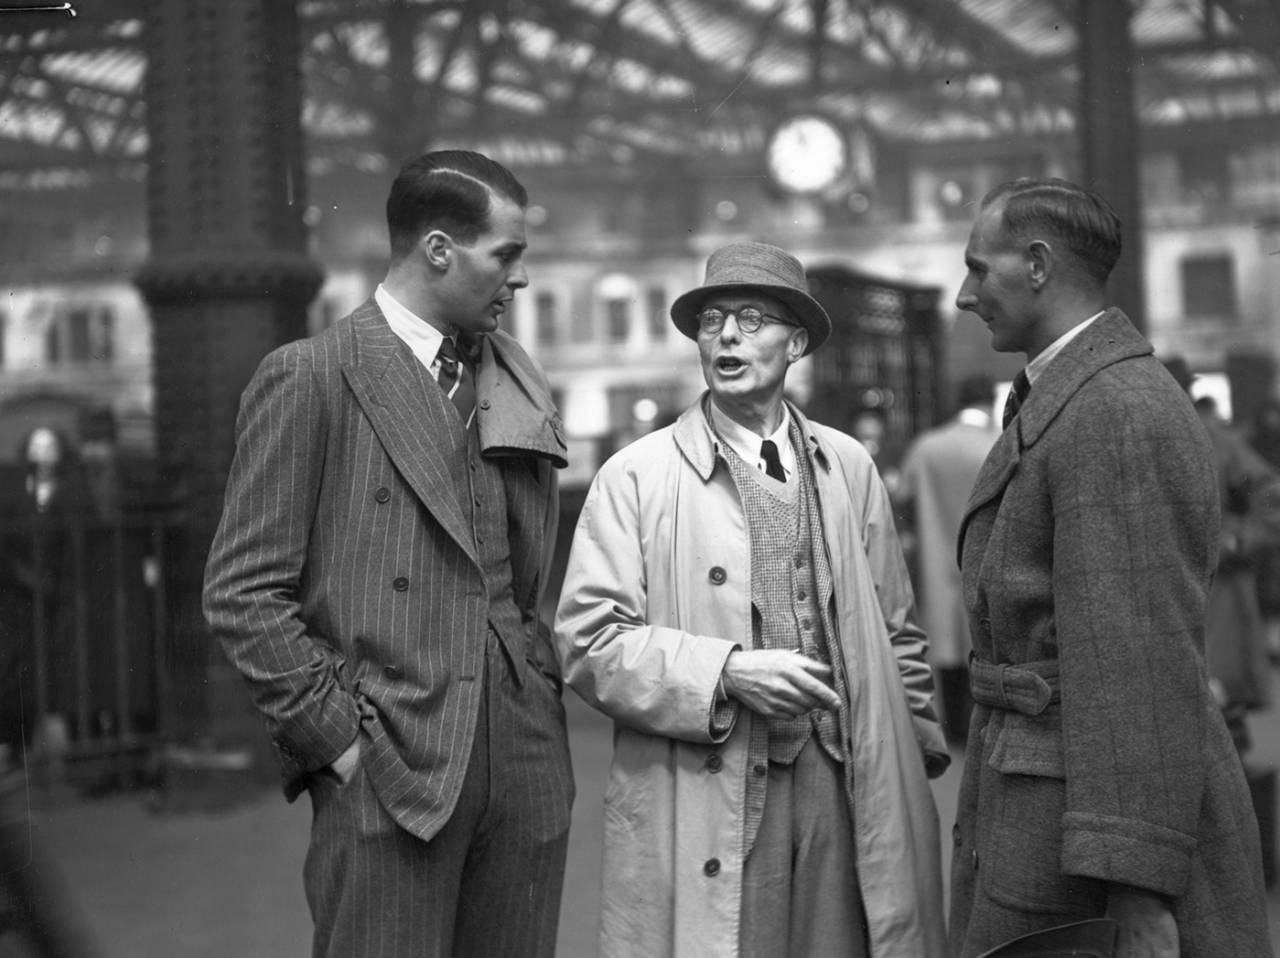 Ken Farnes (left) and Hedley Verity (right) are greeted by Farnes' father on their return to England at the end of the 1939 tour of South Africa, Waterloo Station, London, March 31,  1939